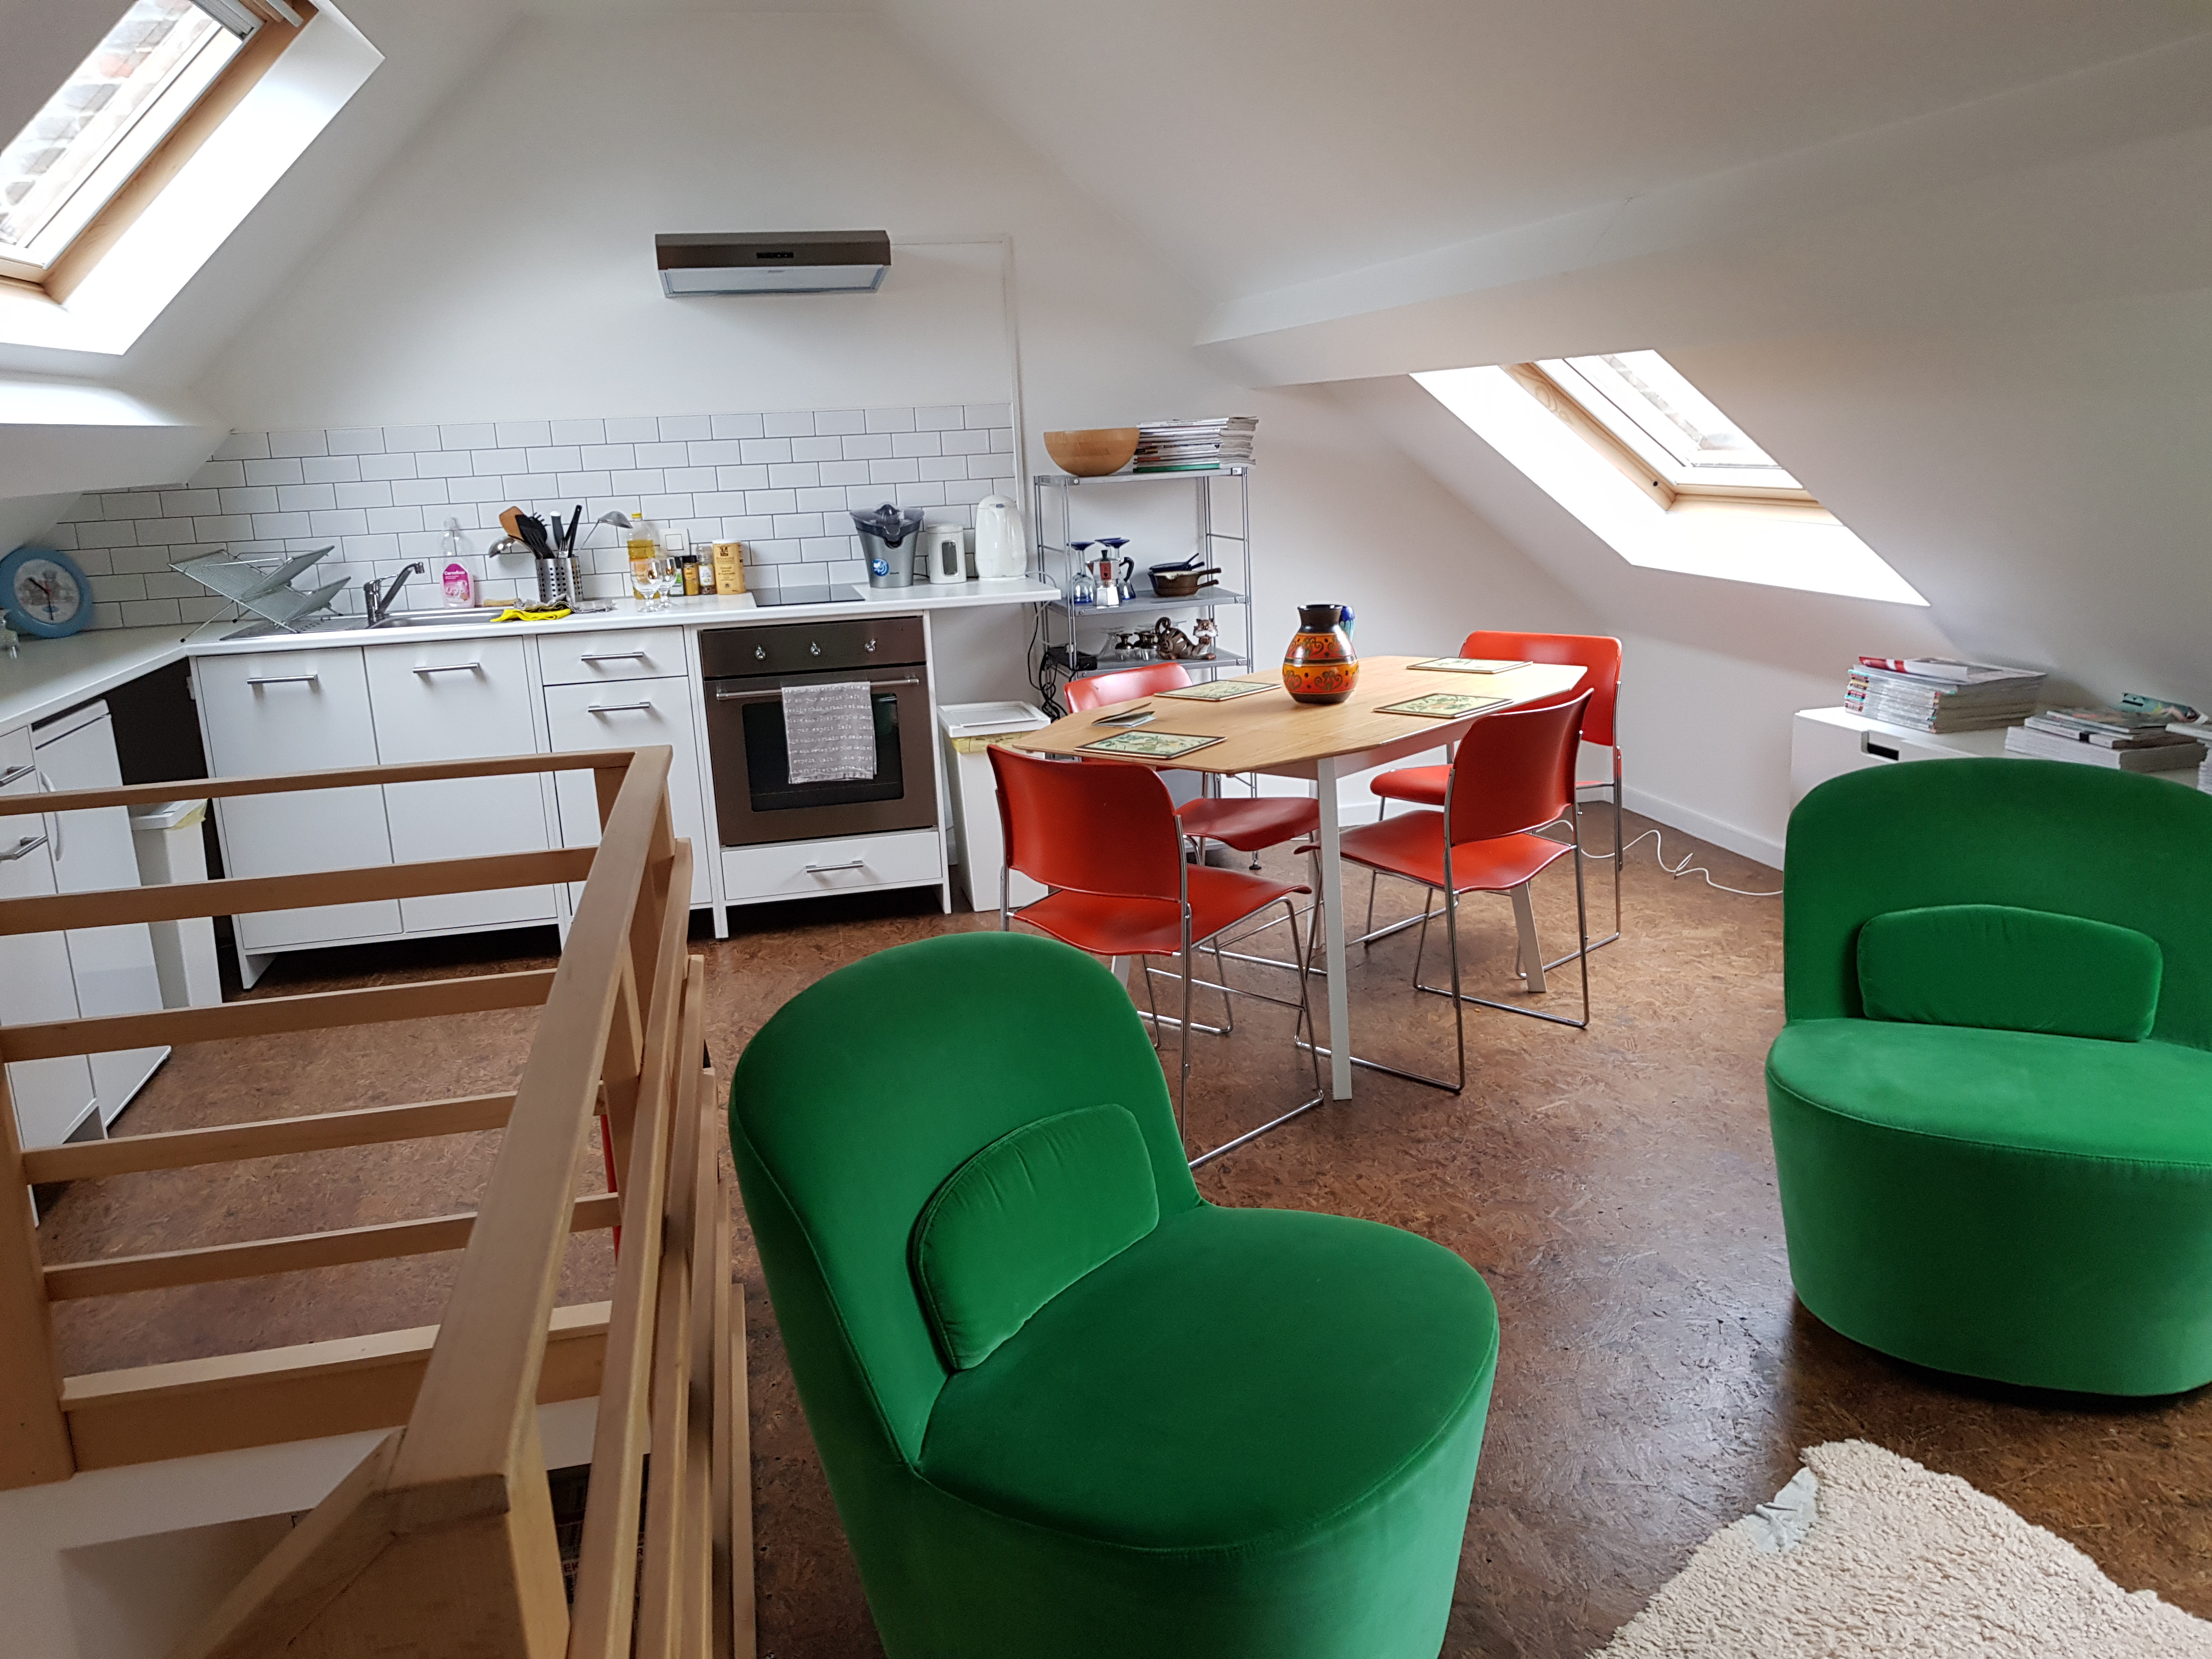 The kitchen, dining and living area in the upstairs area of the airbnb